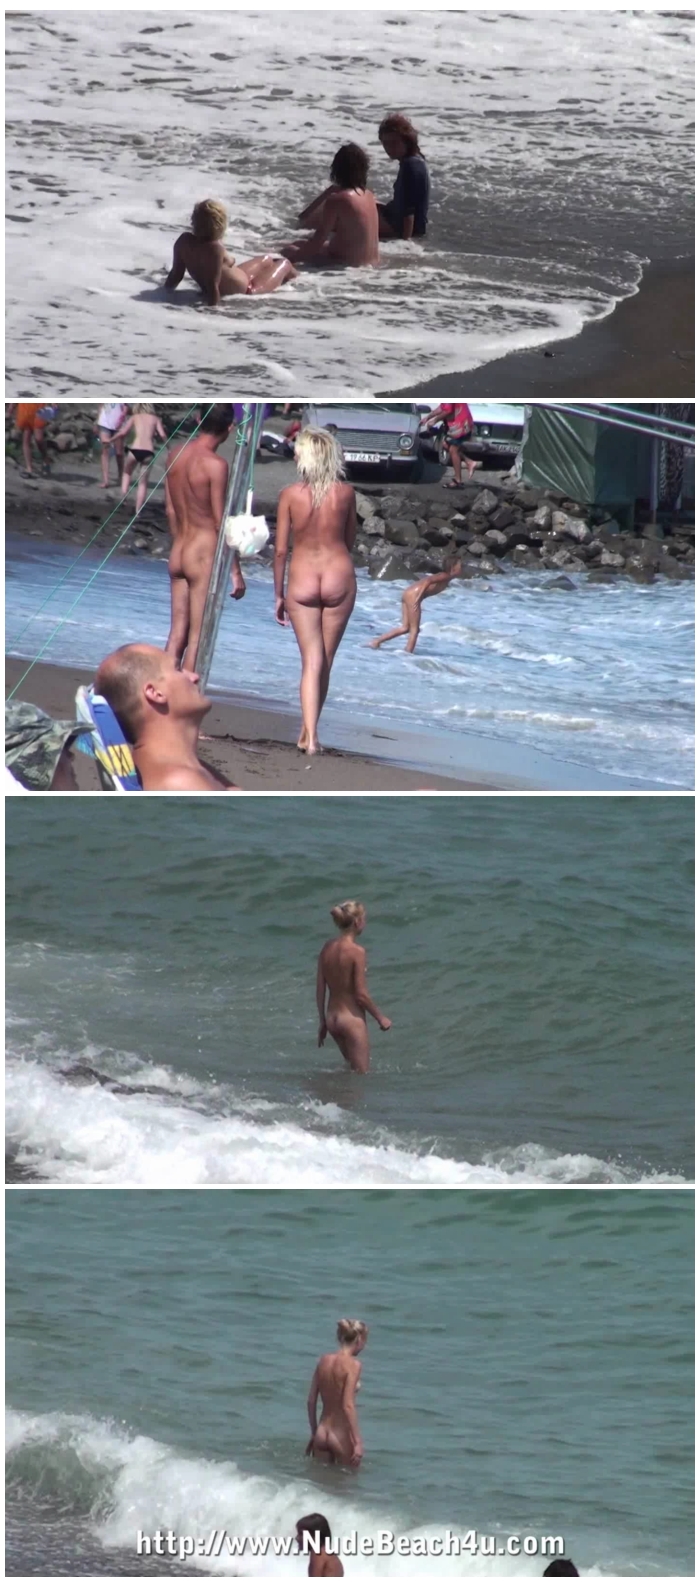 Nude Beach for You - voyeur adult Page 62 Sex-Forum photo